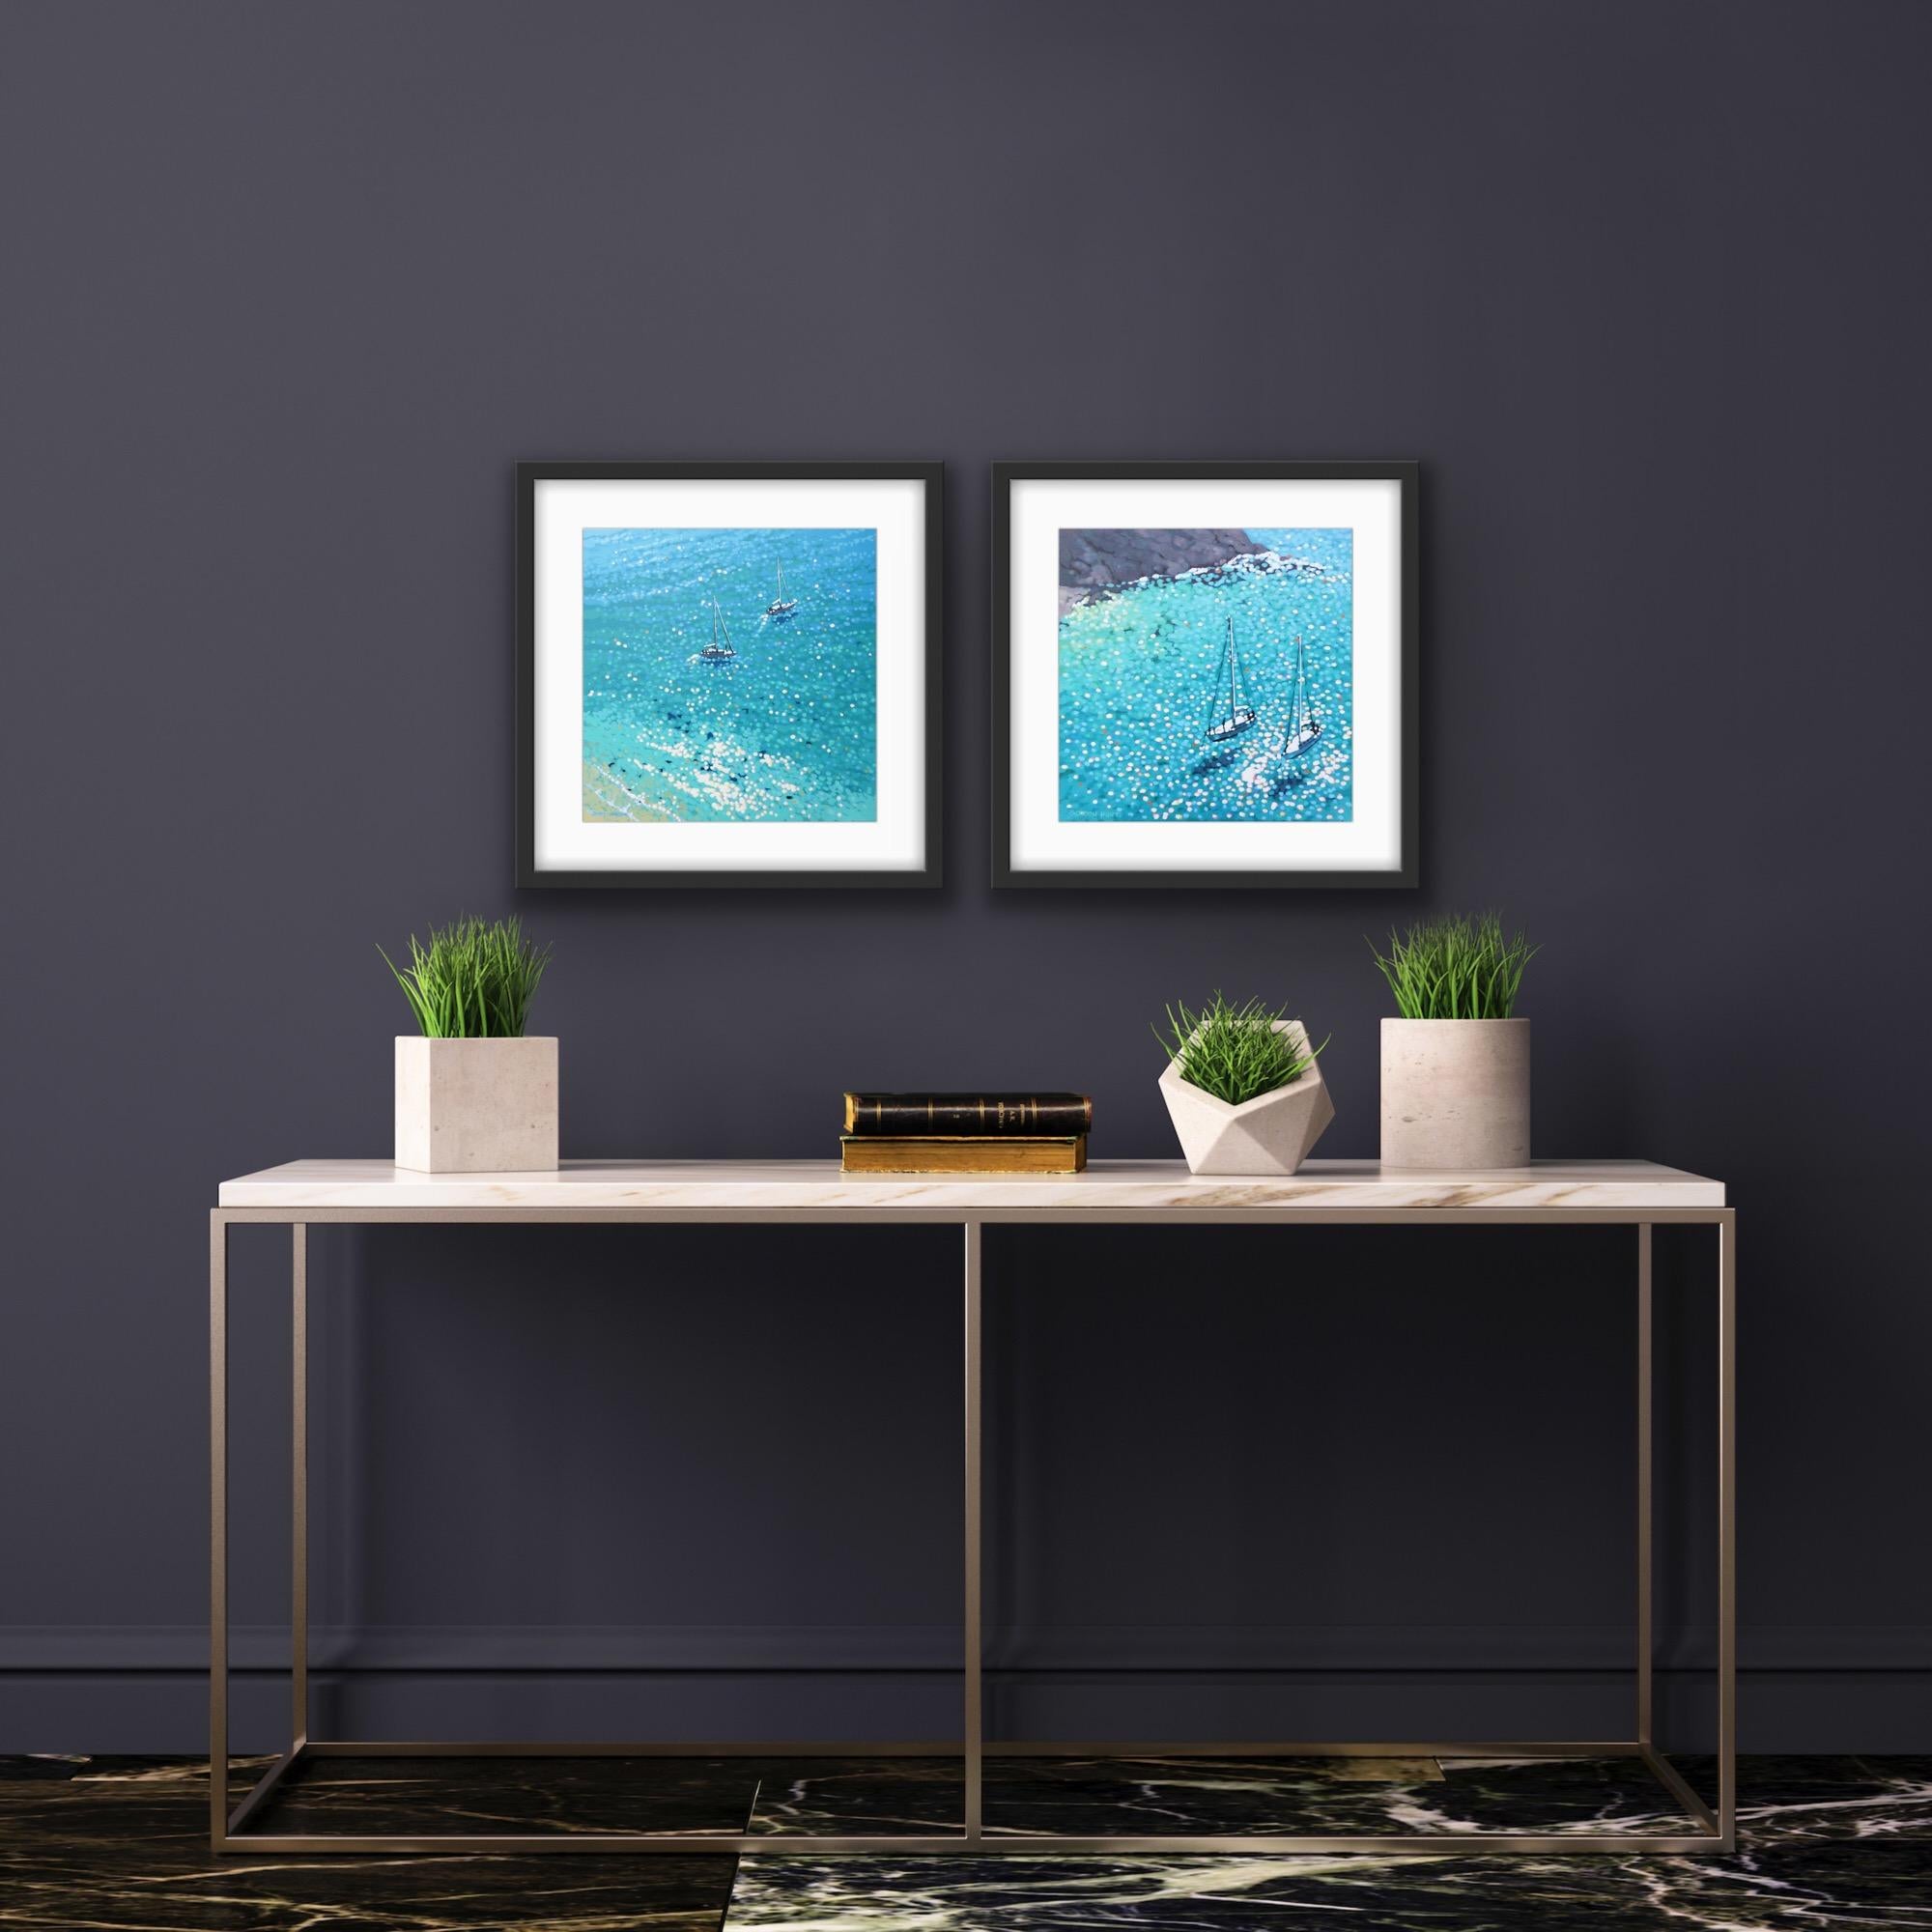 Turquoise Bay and Lantic Lunch (small) Diptych - Print by Gordon Hunt